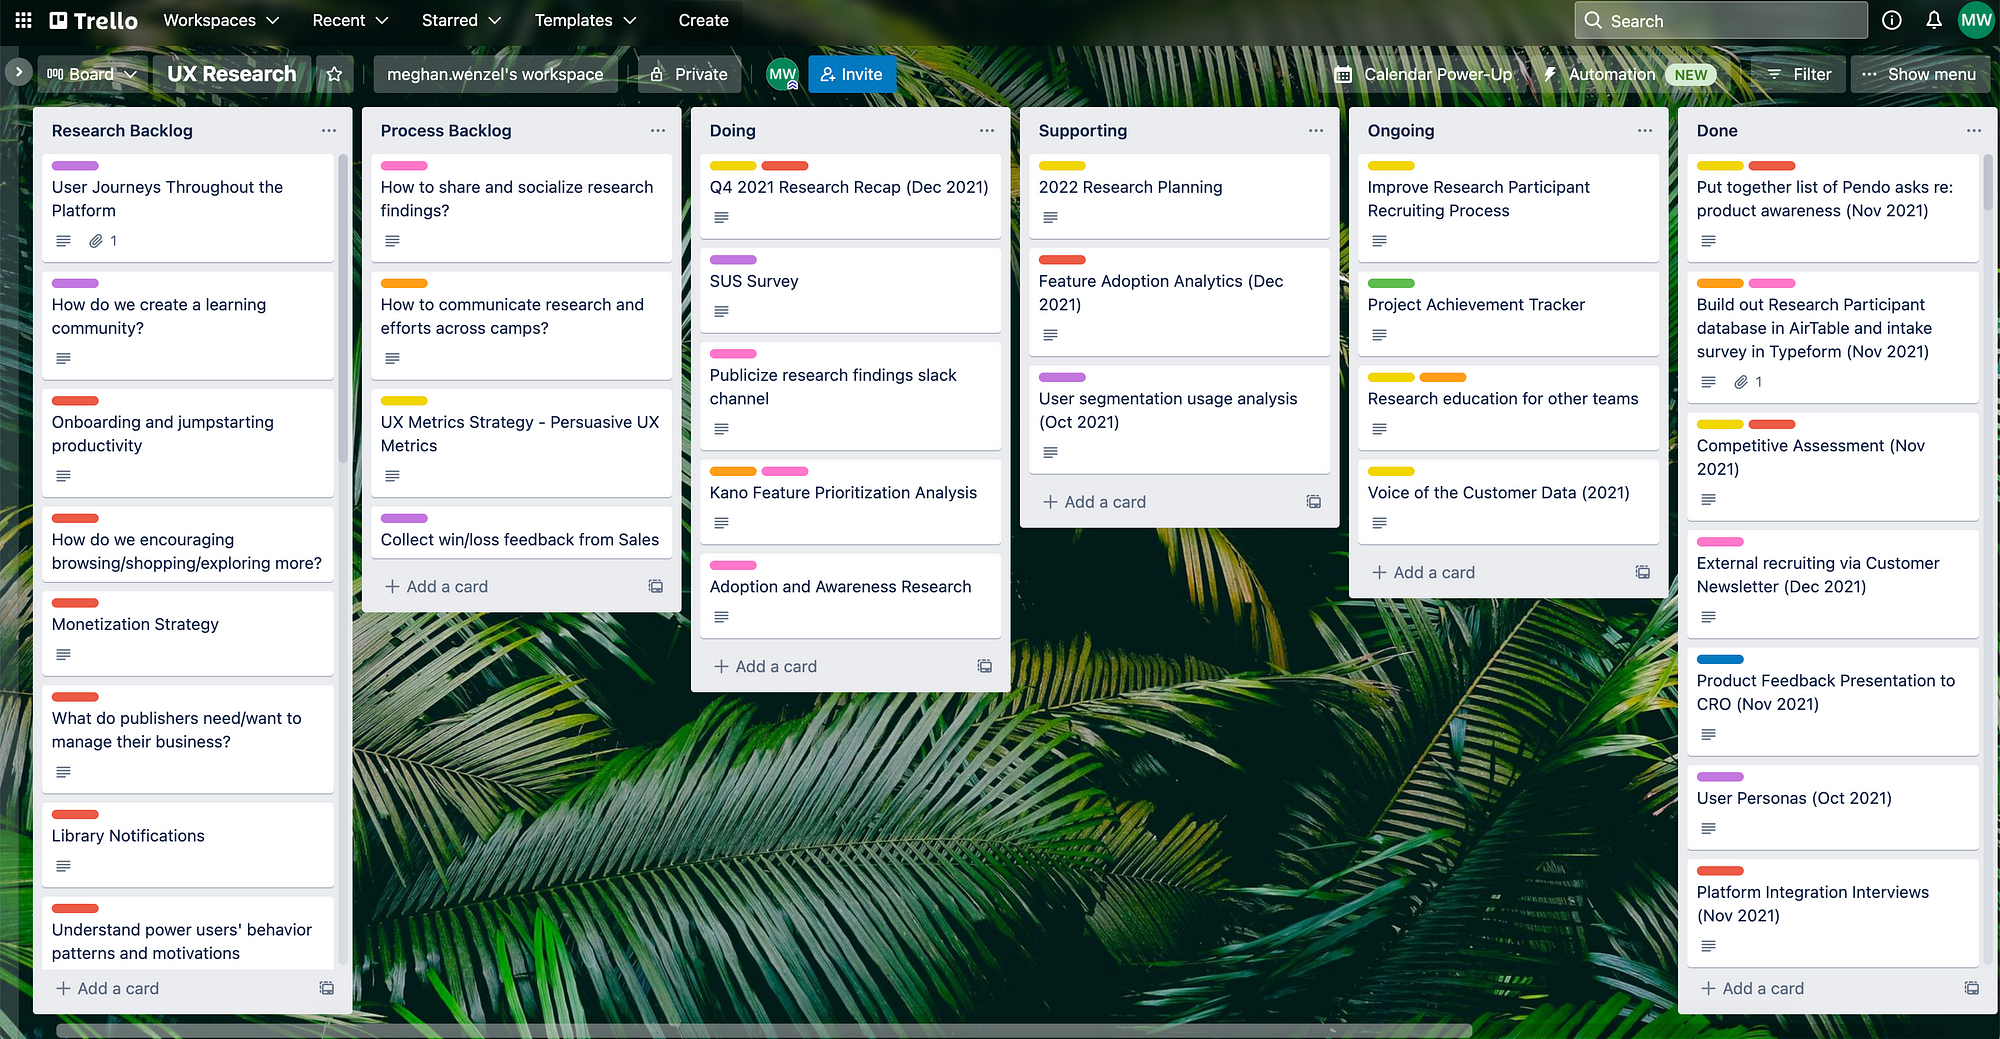 This screenshot shows a sample trello board with the following columns: research backlog, process backlog, doing, supporting, ongoing, and done.